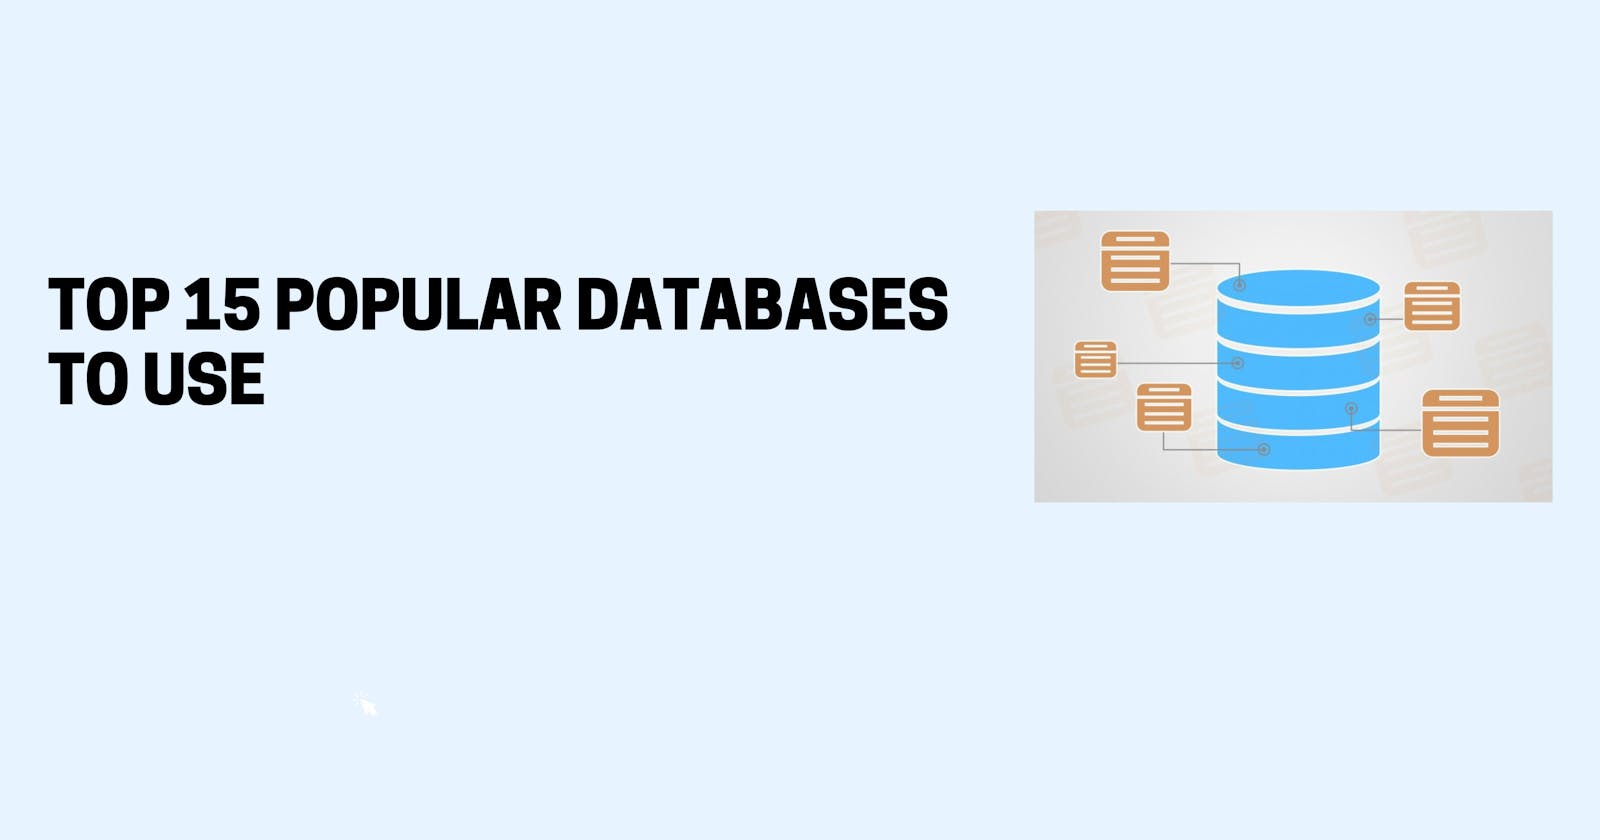 Top 15 Popular Databases to Use